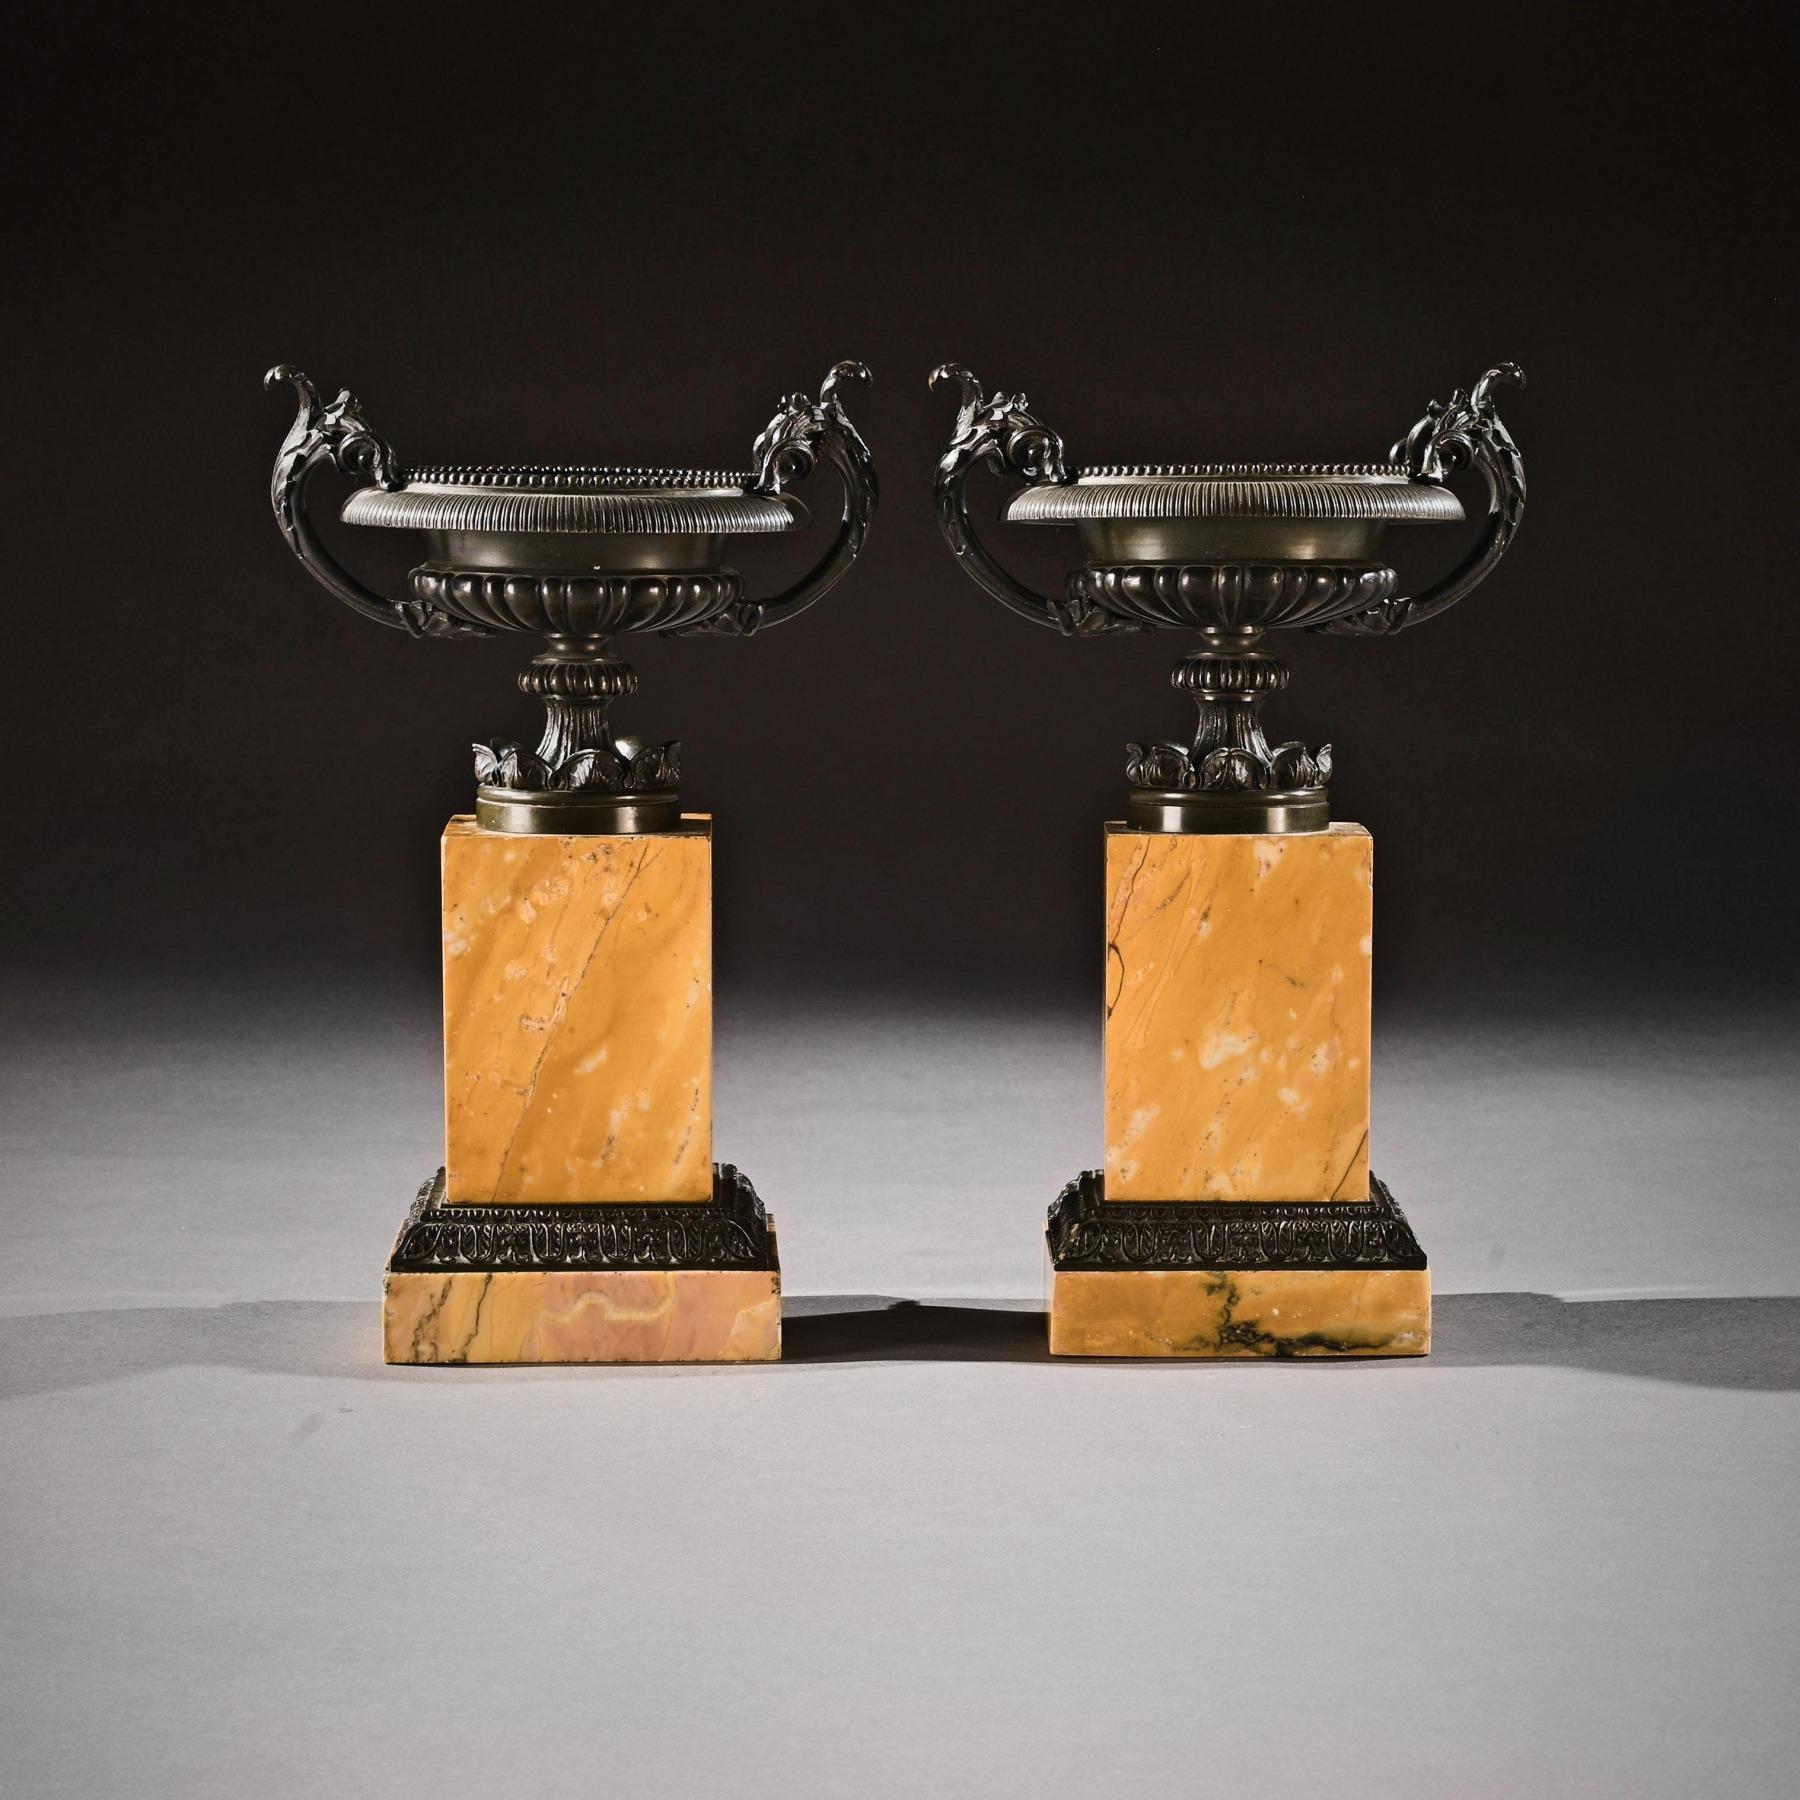 A larger than normal pair of early 19th century Grand Tour patinated bronze and Sienna marble tazzas in the neoclassical taste.

French, circa 1820.

Of large proportions standing 35cm in height, each patinated bronze Tazza having a beaded rim